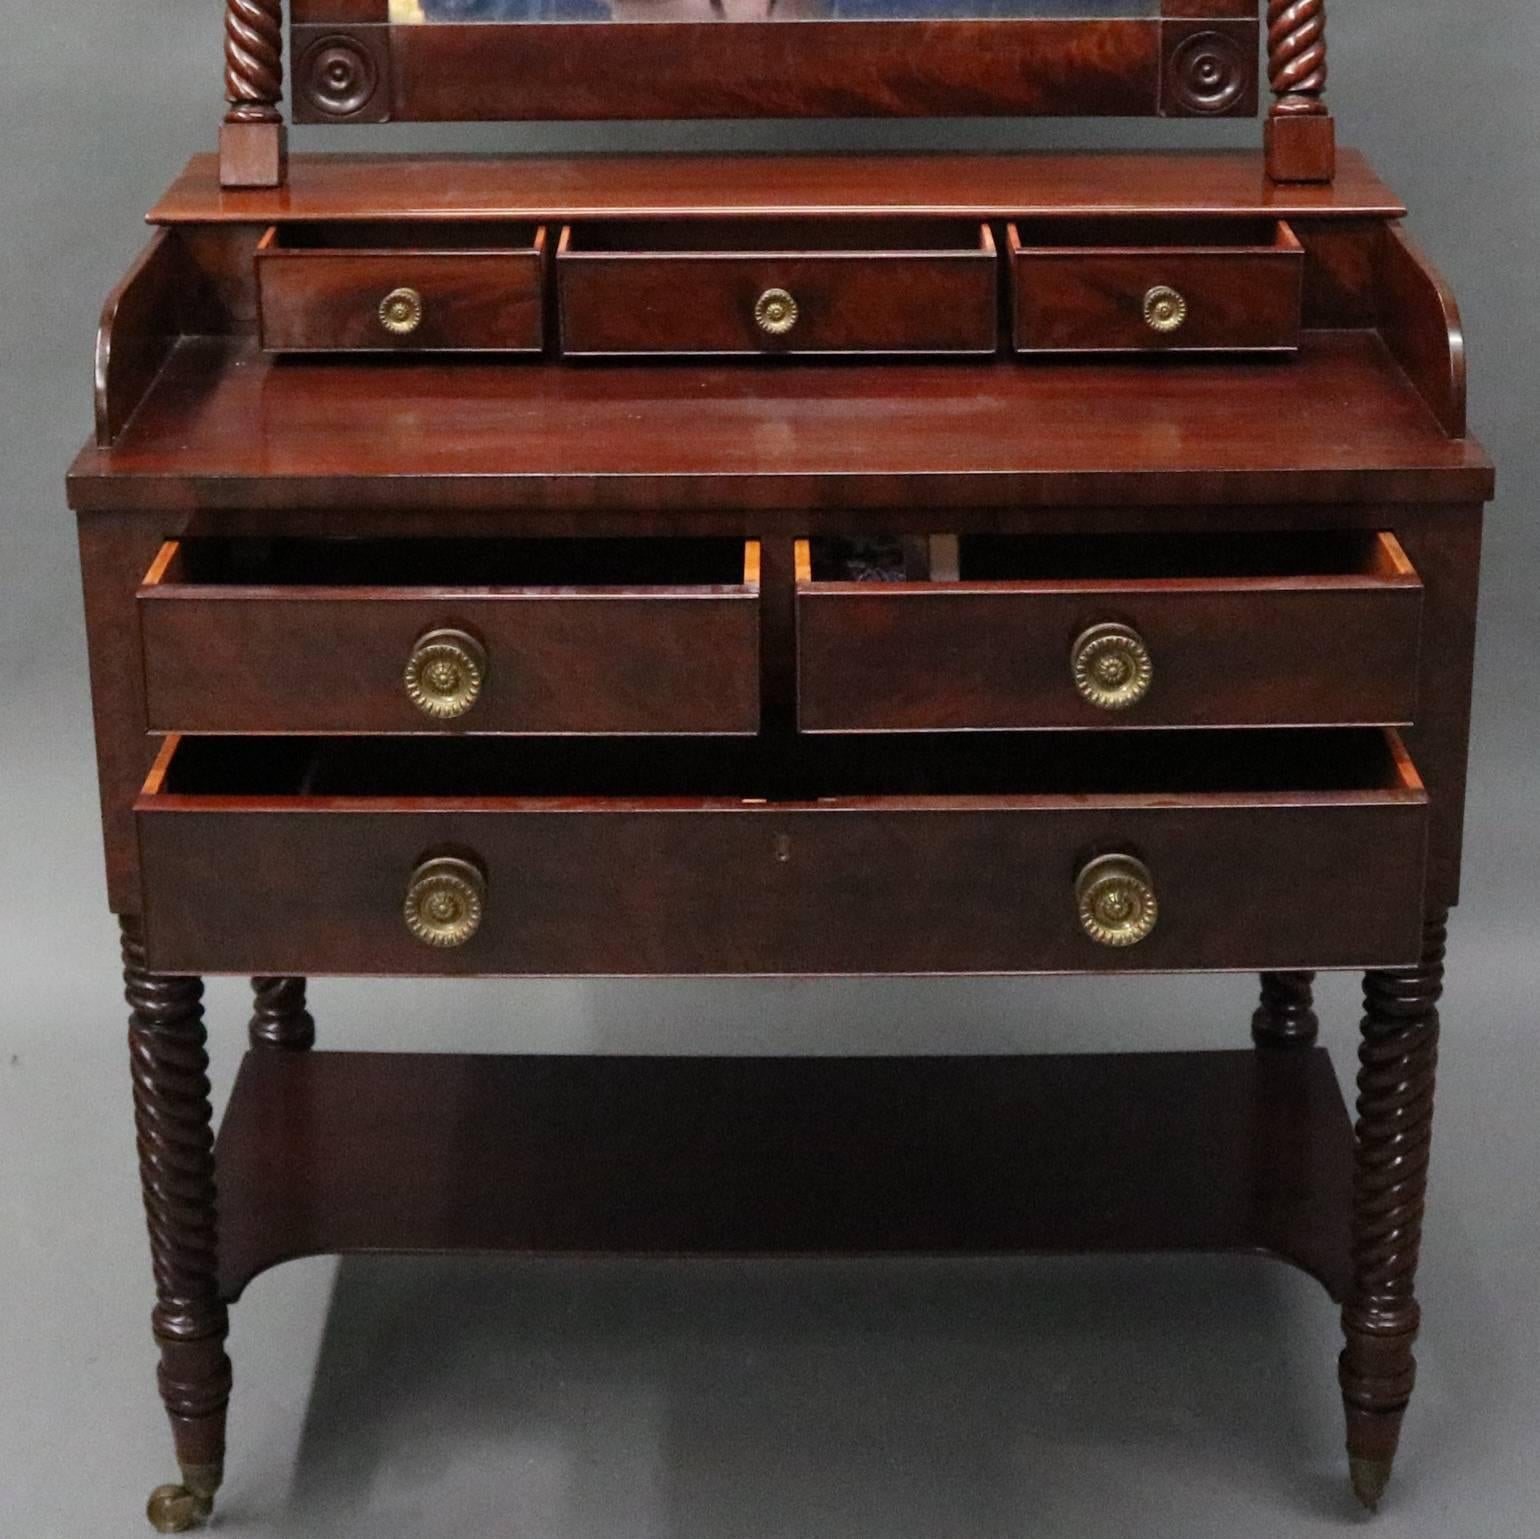 19th Century Antique Carved Flame Mahogany and Bronze Sheraton Mirrored Vanity, circa 1820